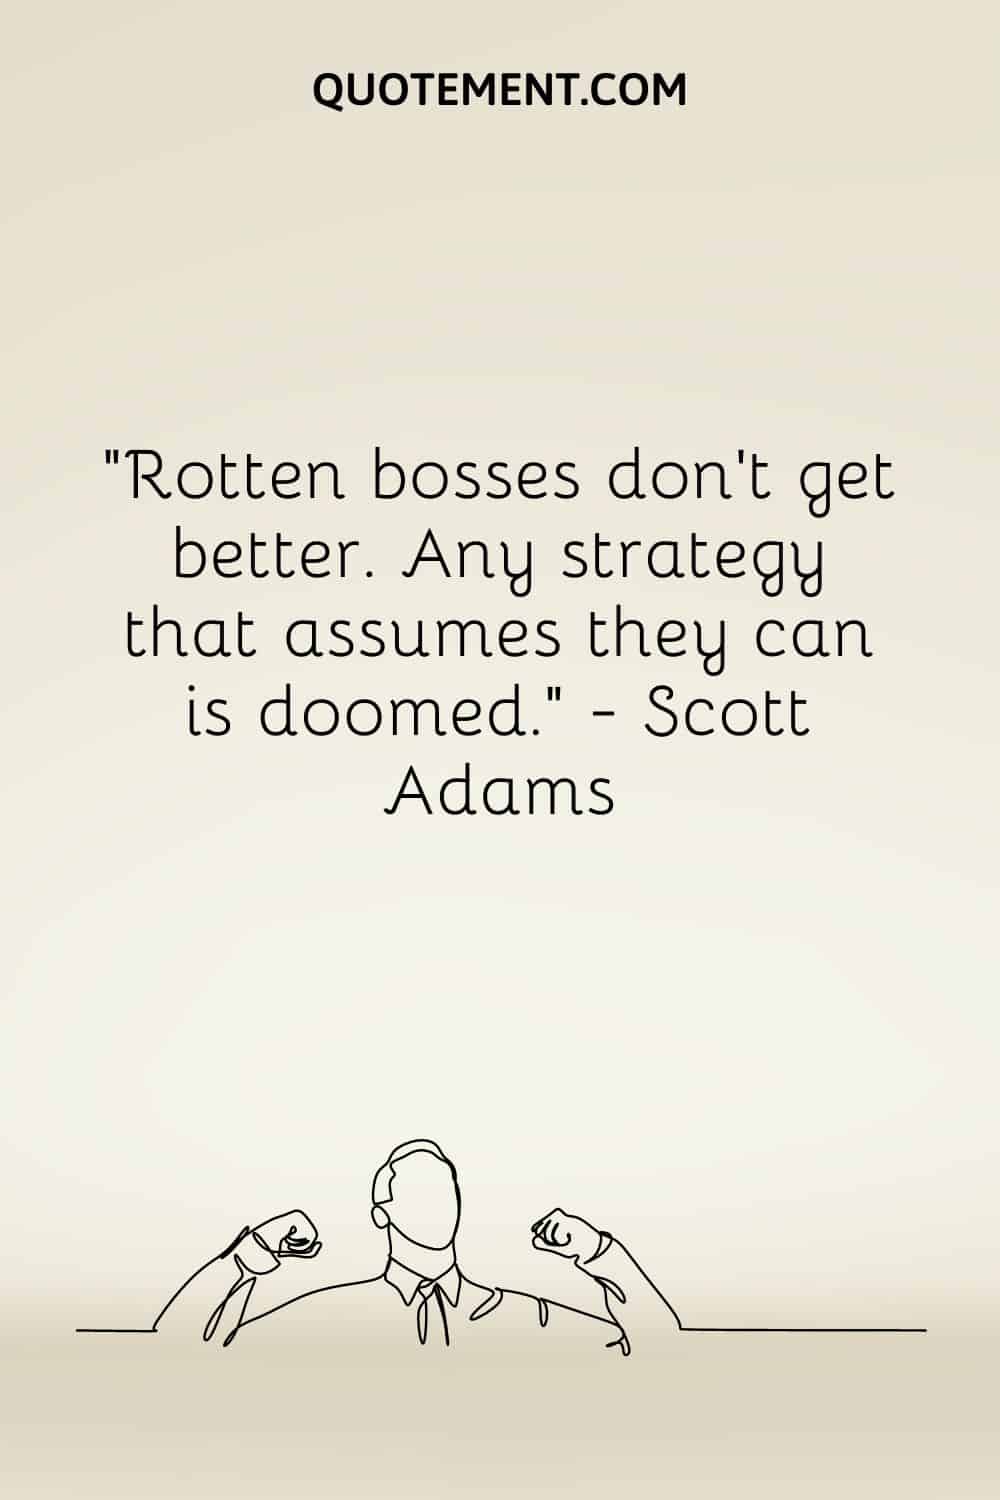 Rotten bosses don’t get better. Any strategy that assumes they can is doomed